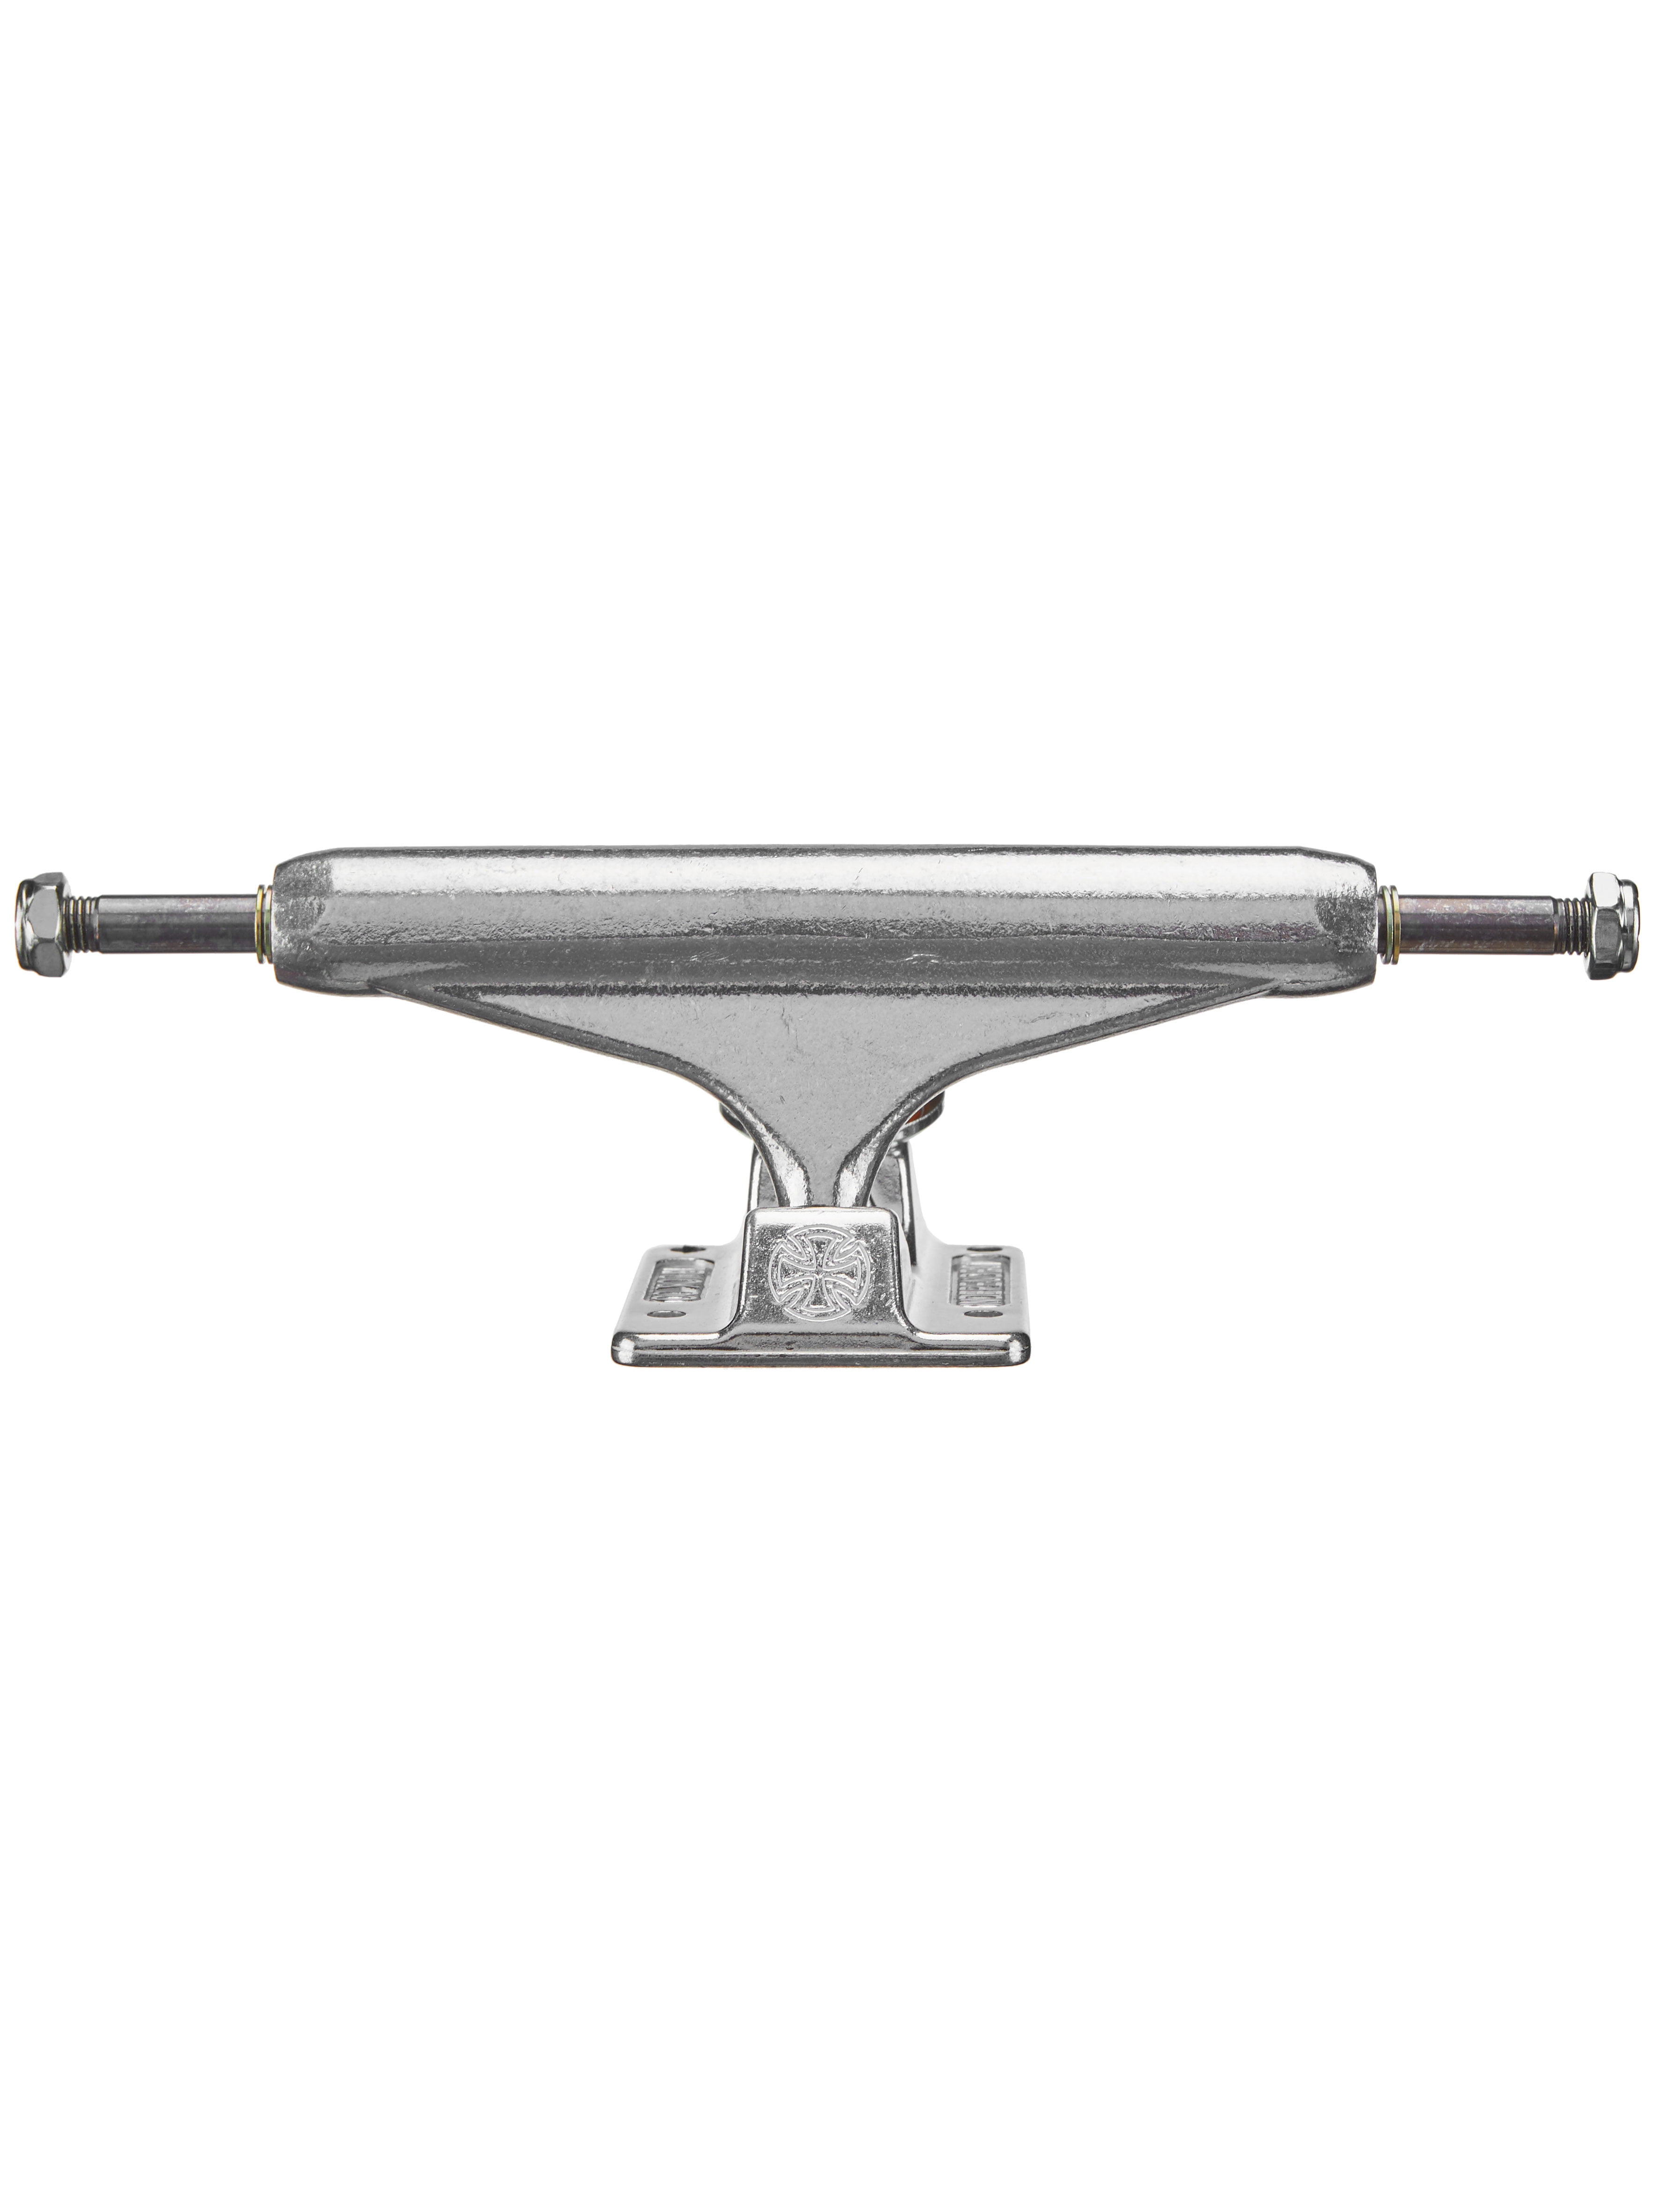 Indepenedent Forged Hollow Stage11 Trucks Silver 139mm Set 